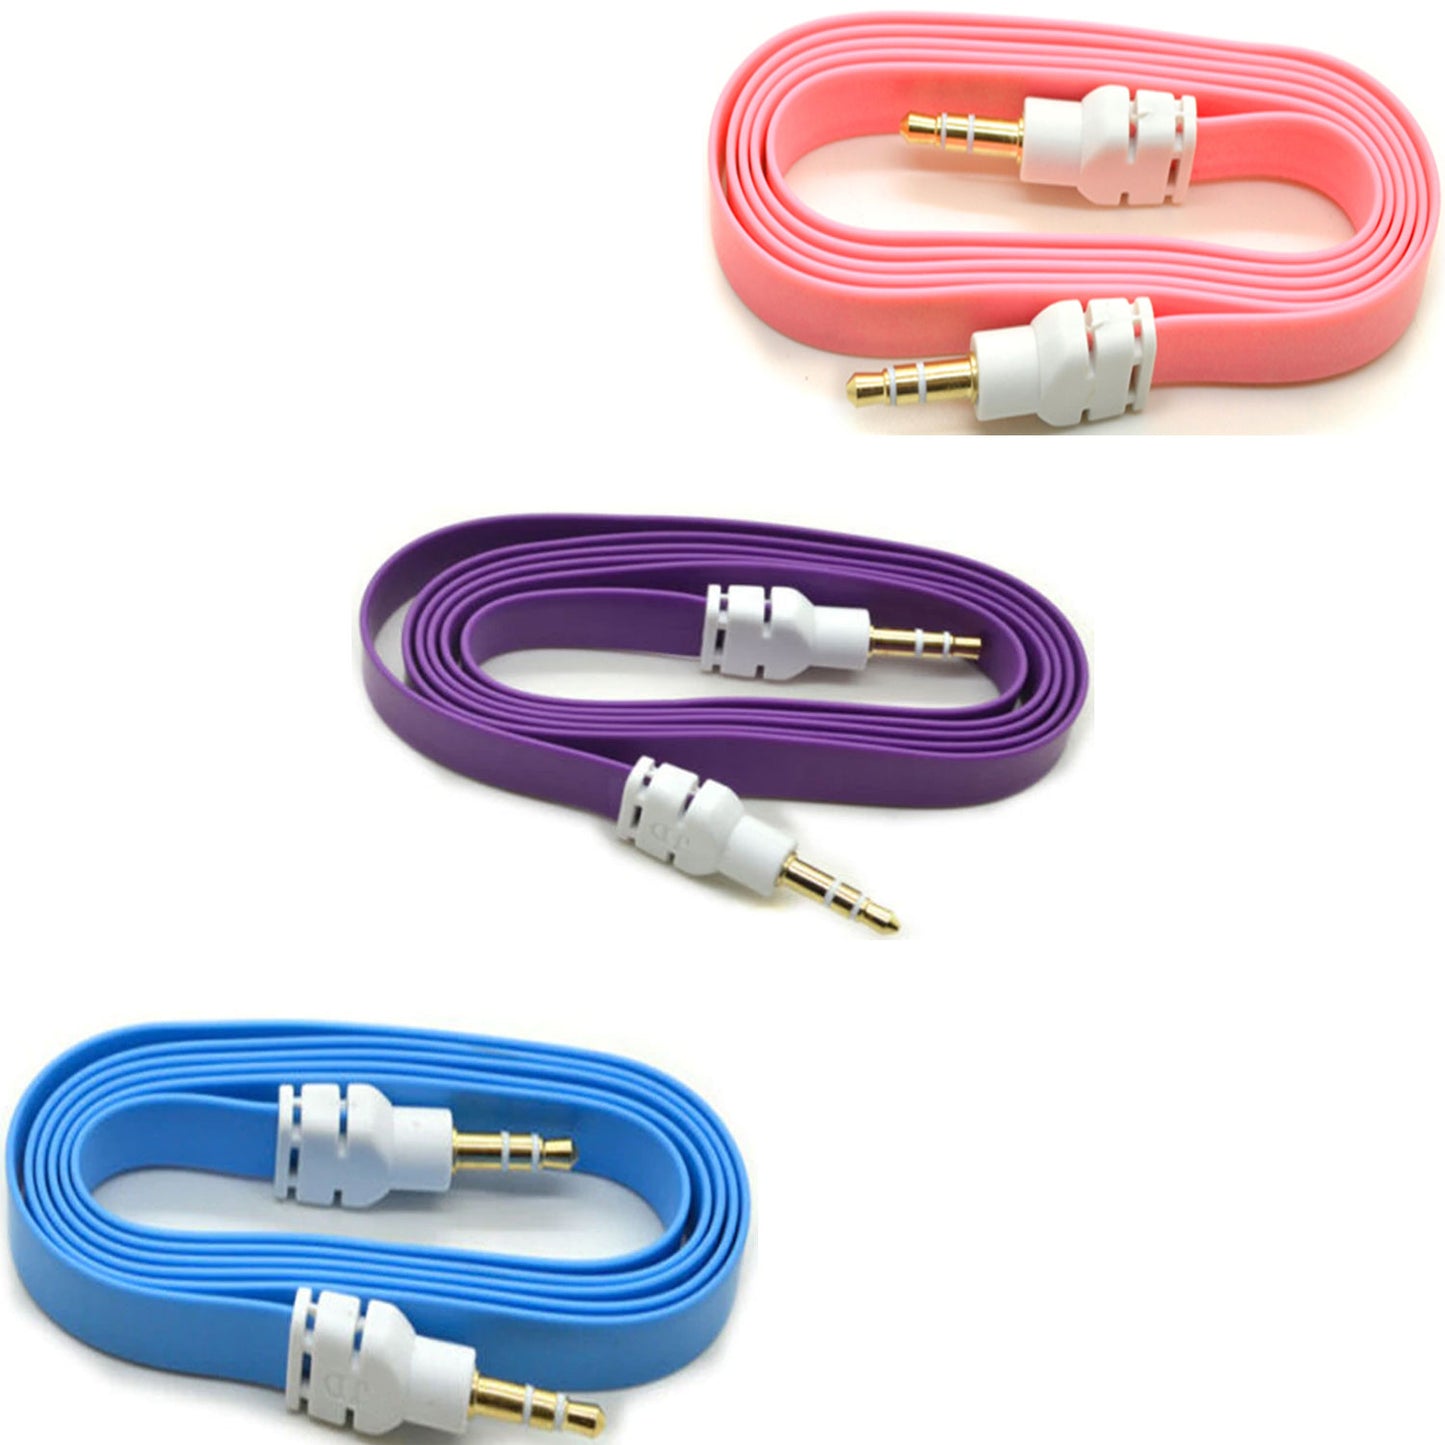 3-Pack Aux Cable Audio Cord 3.5mm Adapter Car Stereo Aux-in Speaker Jack Wire (Blue Purple Orange) - ONG73